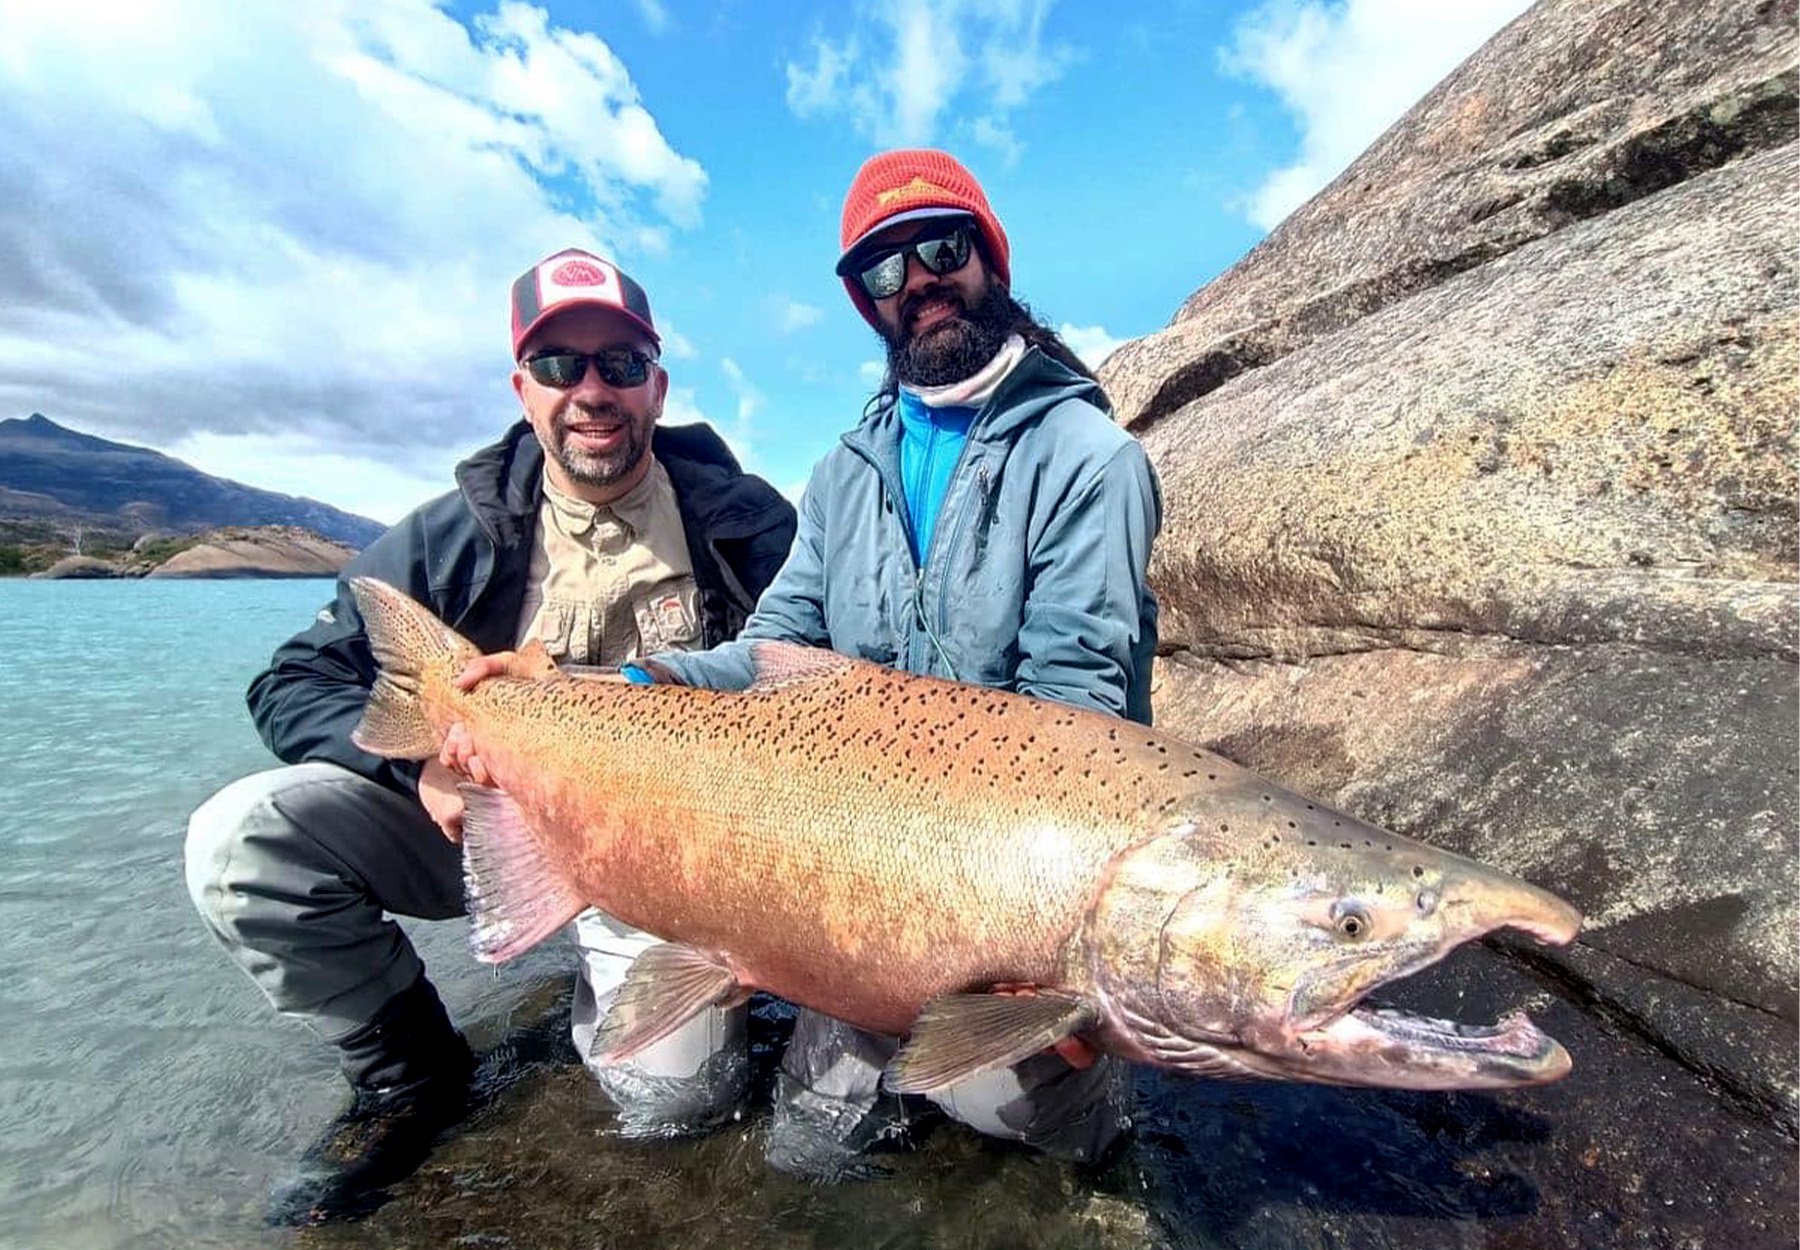 Two anglers hold up giant king salmon caught in Argentina.